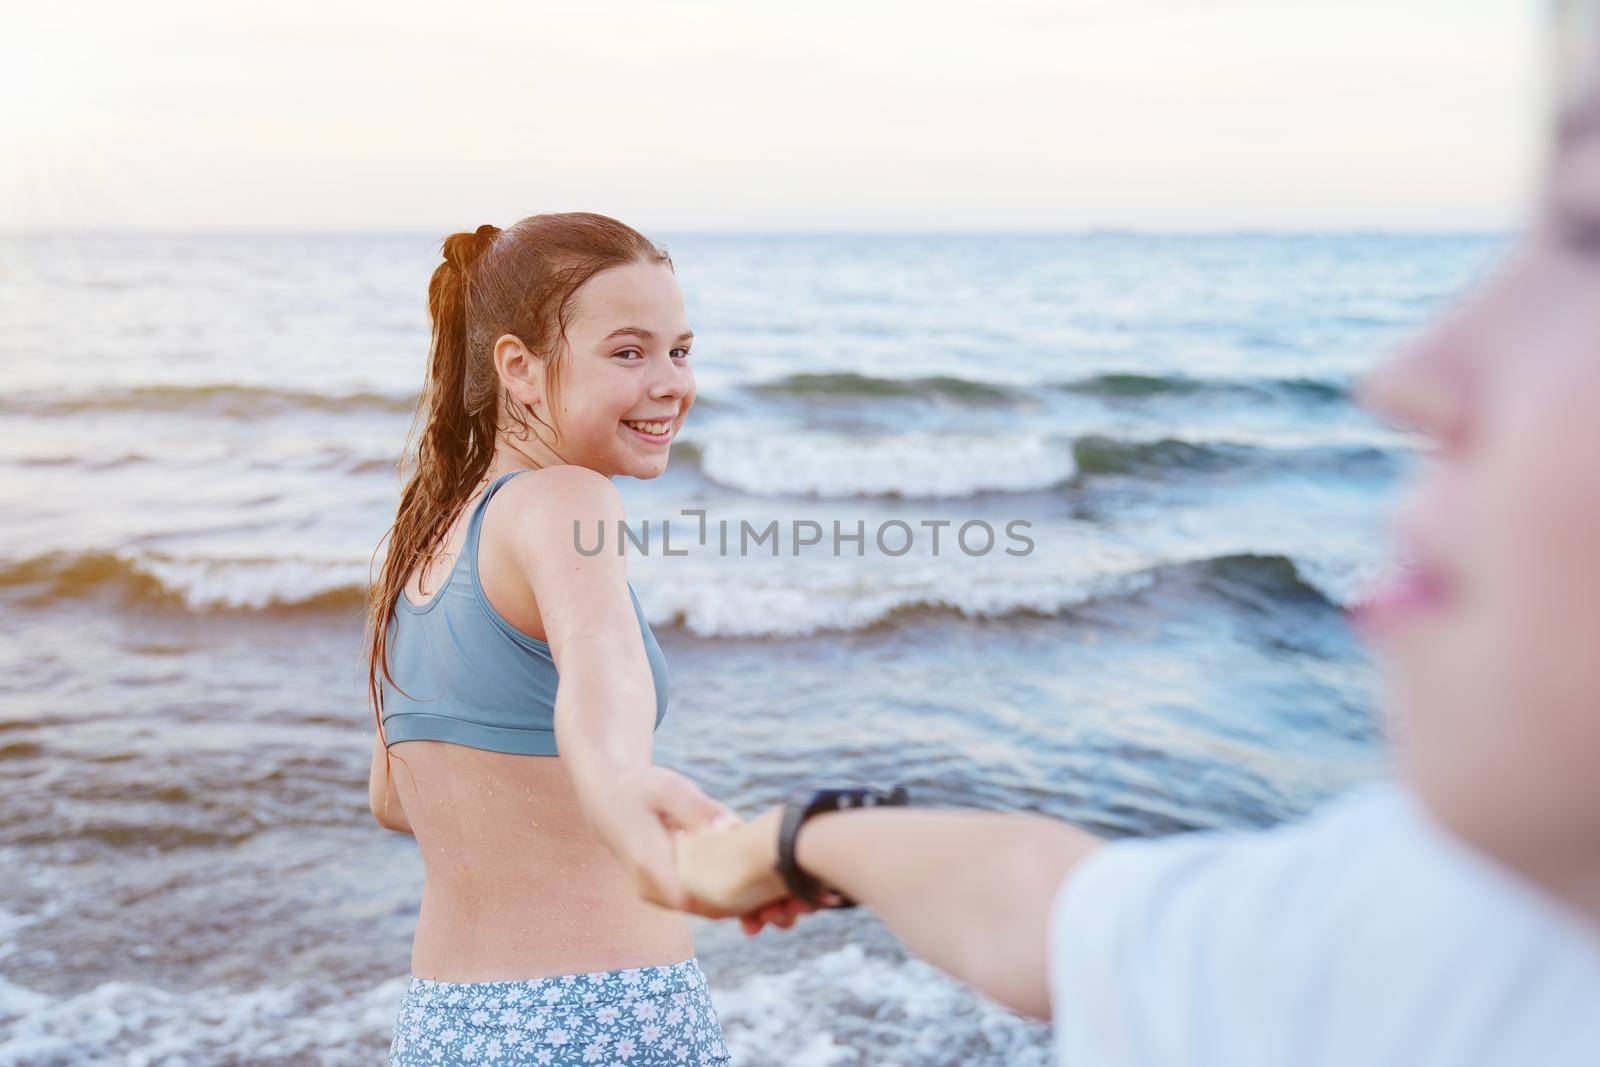 follow me swimming. Smiling girl standing at sea and invites you to swim, follow me travel concept. Young woman in follow me pose enjoying the summer.